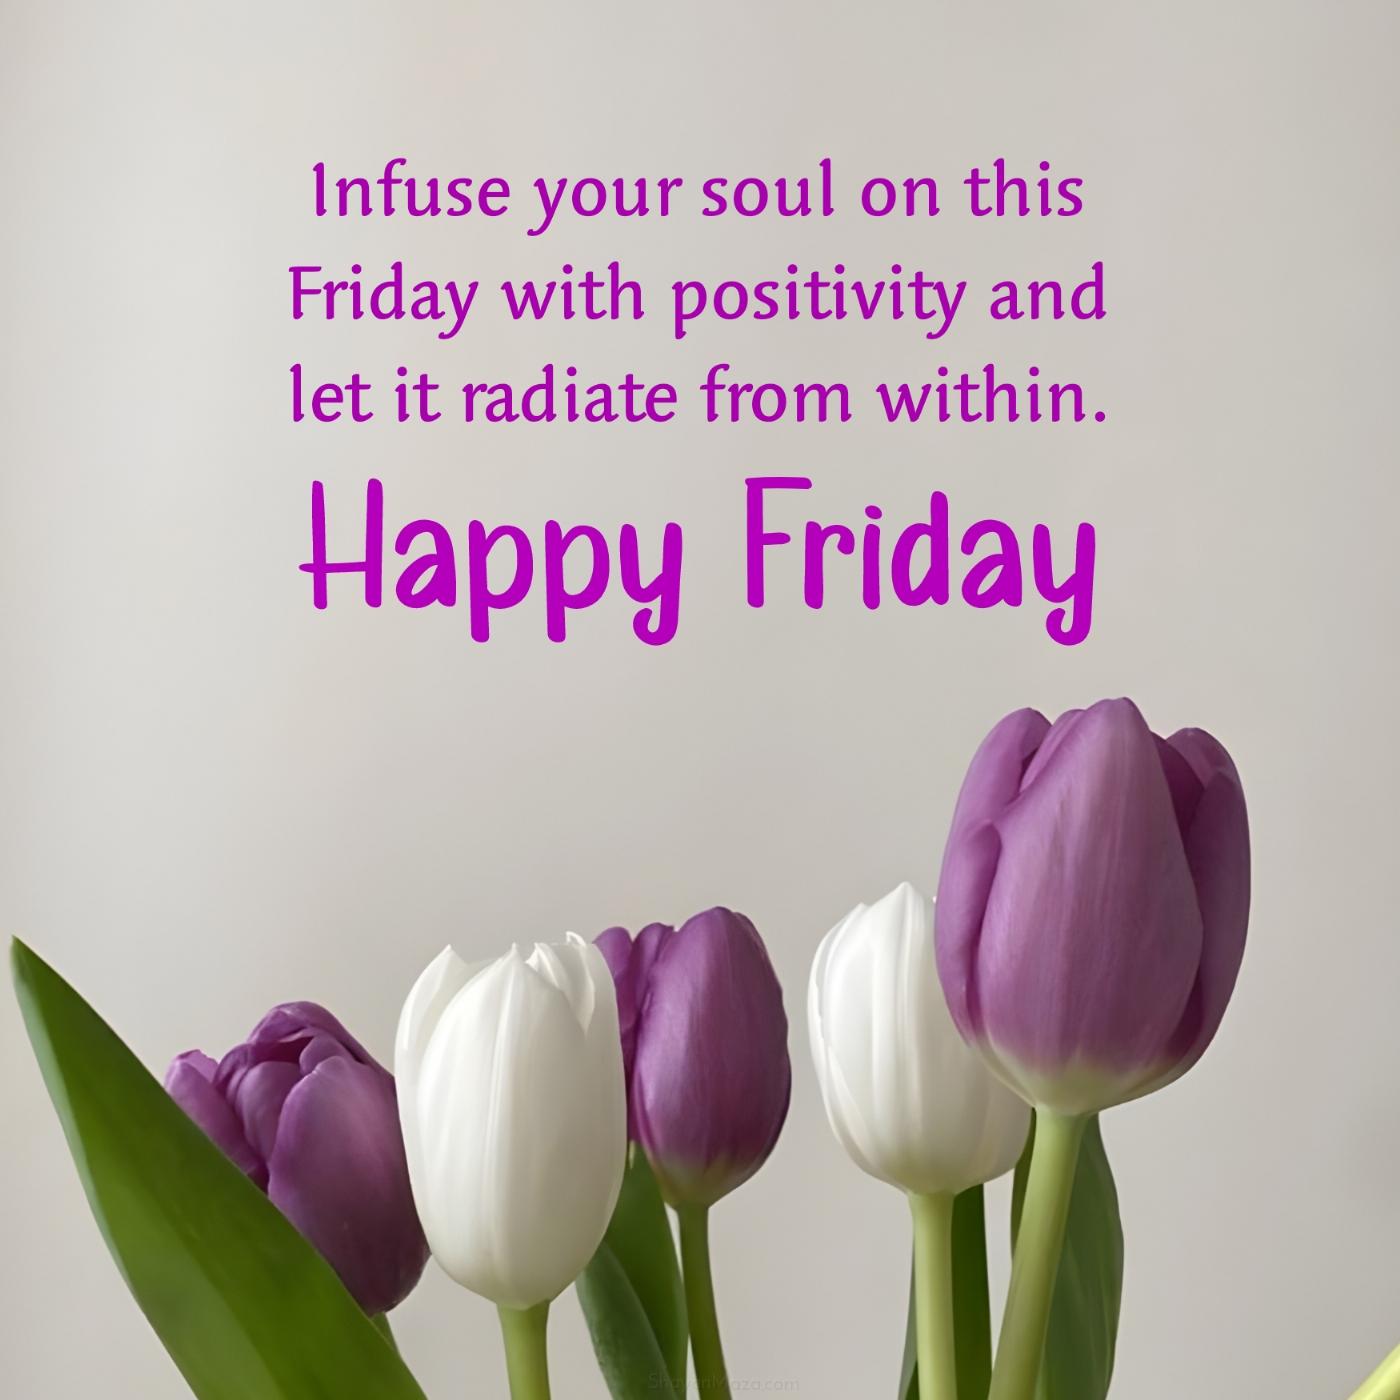 Infuse your soul on this Friday with positivity and let it radiate from within